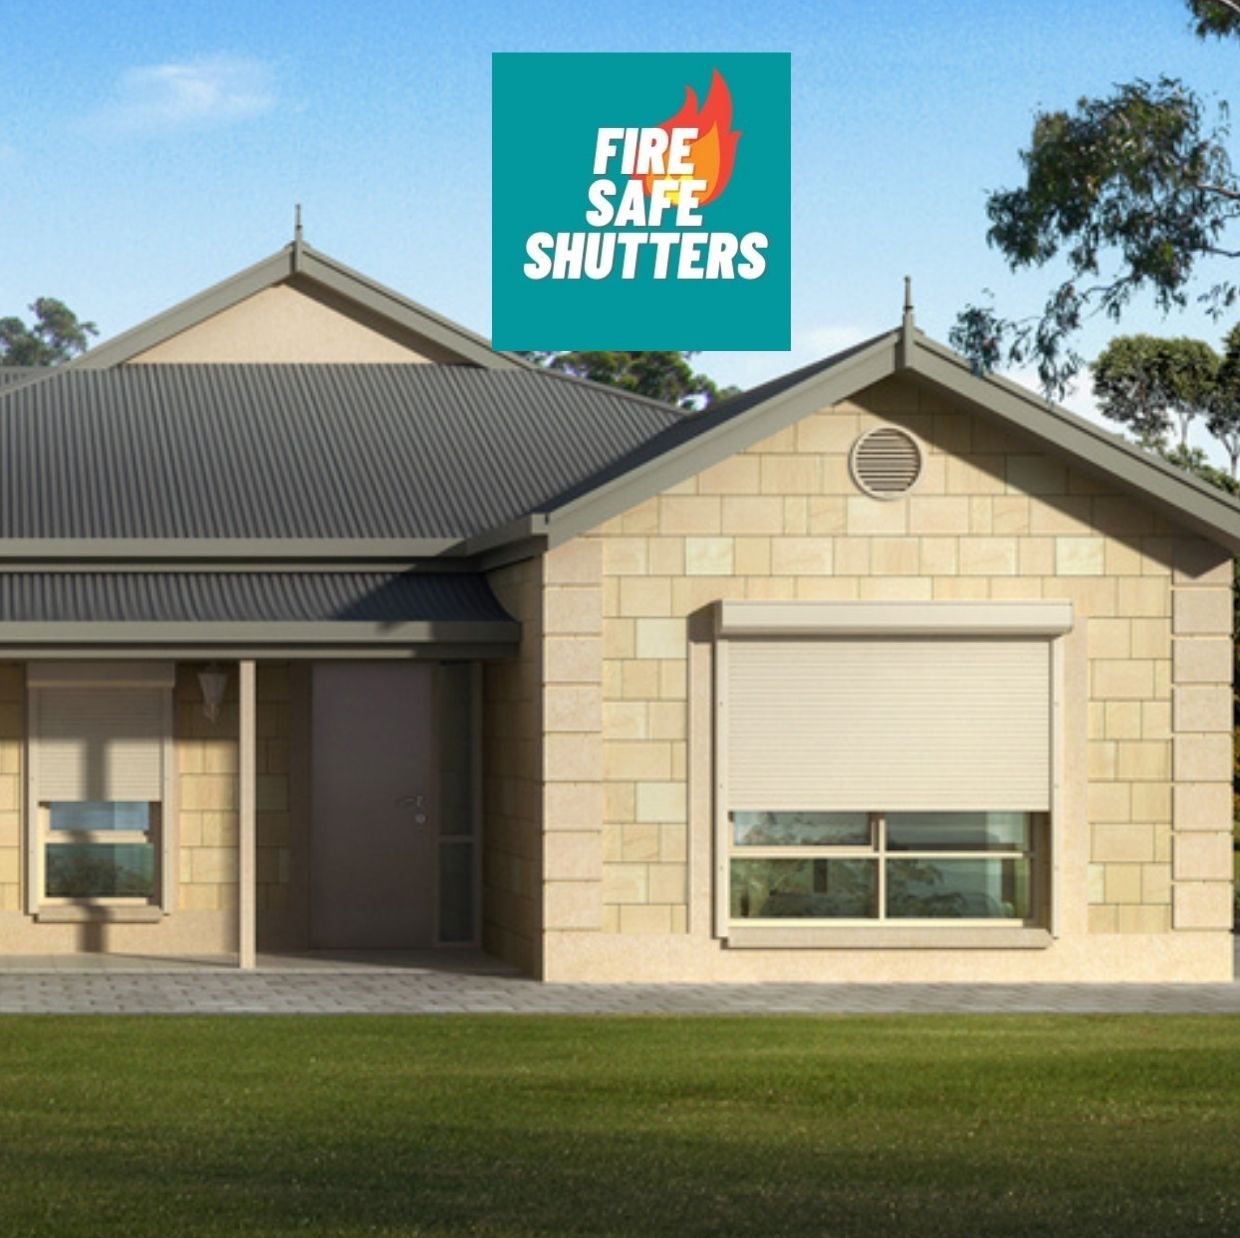 Fire rated shutters